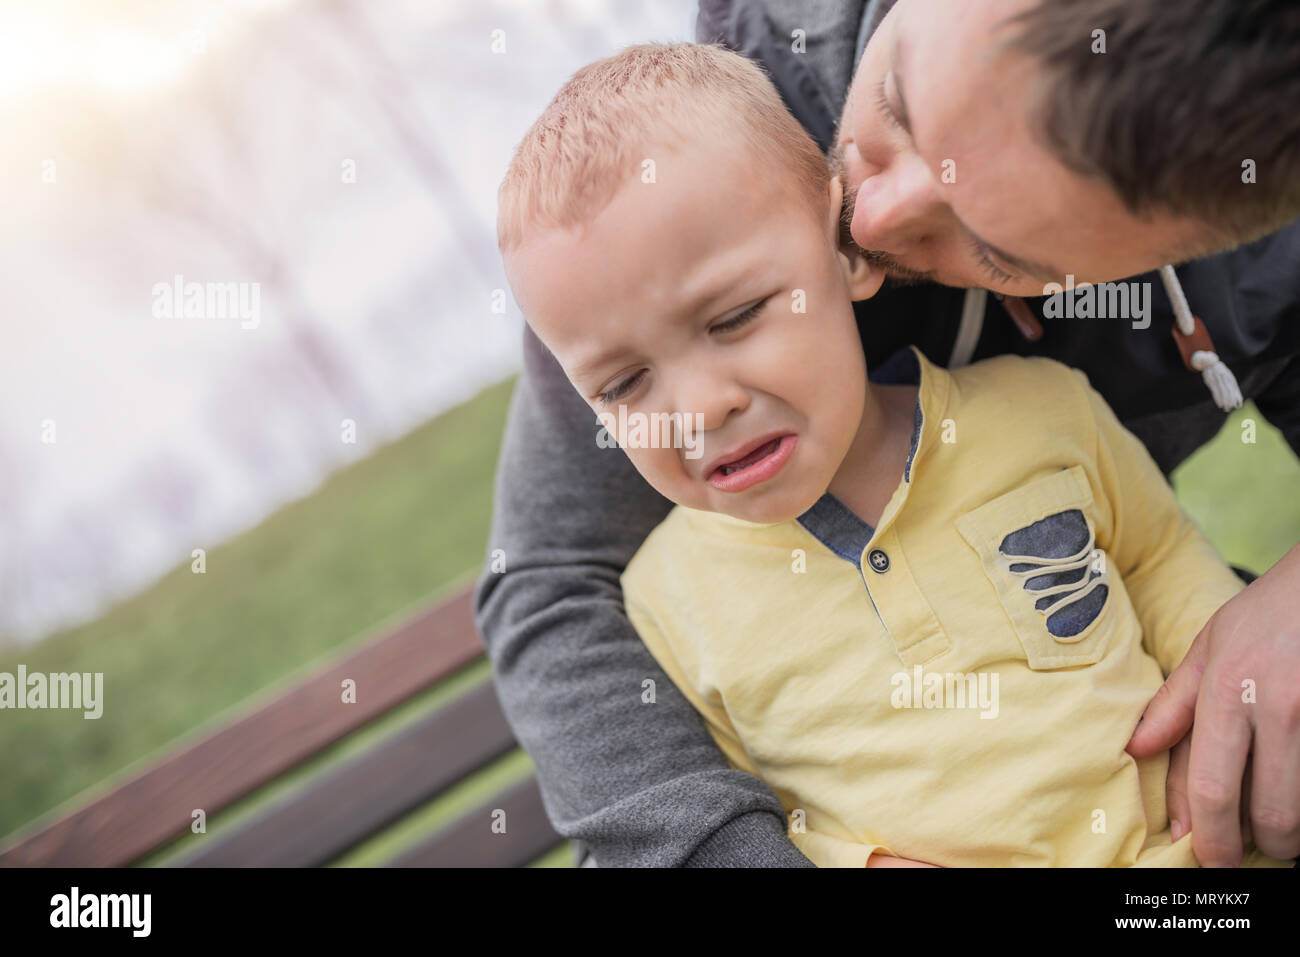 Closeup portrait of a young father and crying kid on playground. Young father hugs crying child. Dad and son. Stock Photo